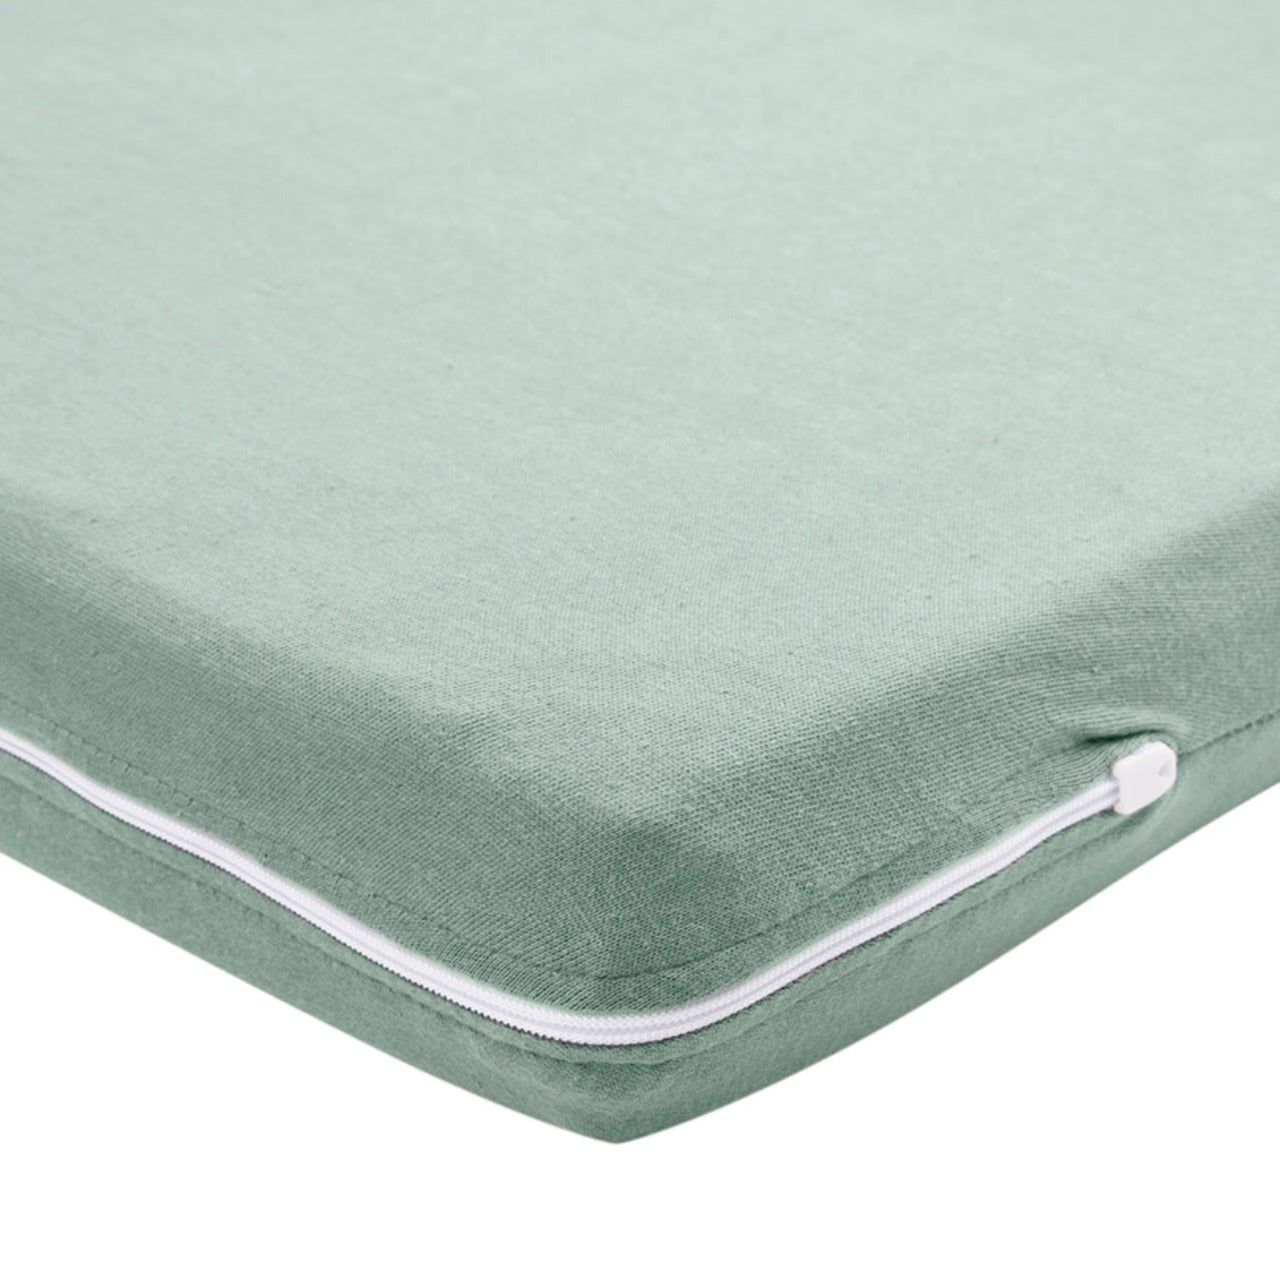 Camping bed mattress fitted sheet 60x120